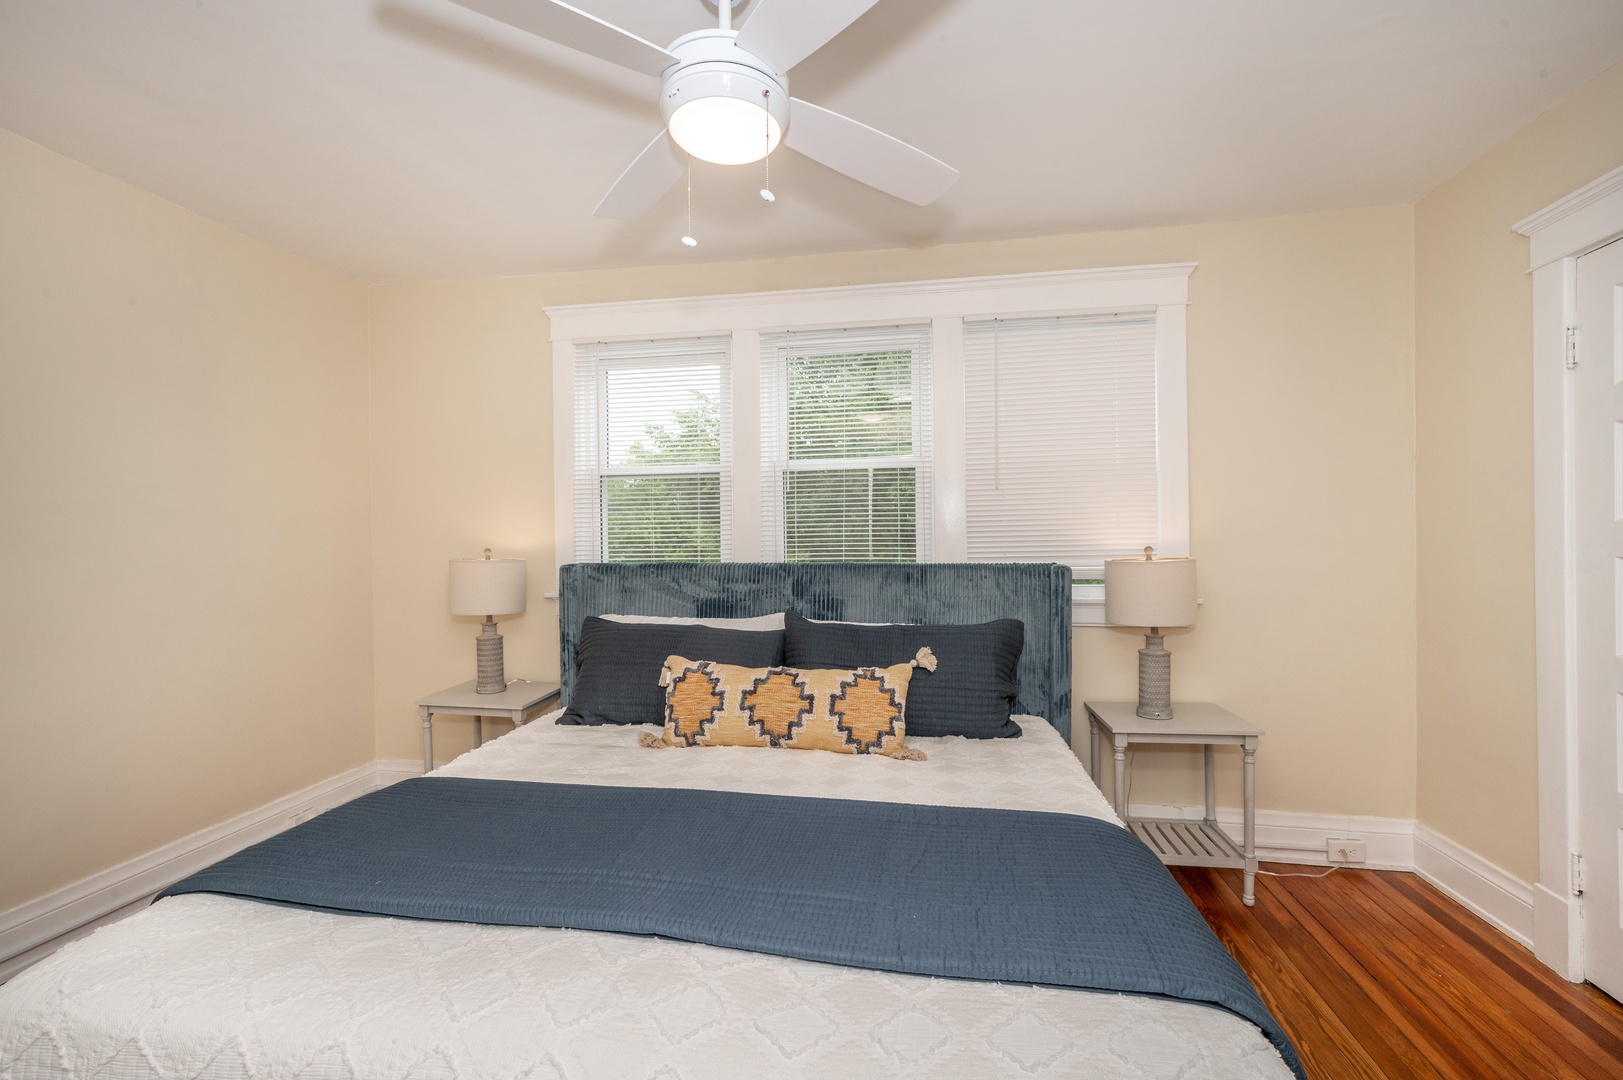 The 1st of 3 bedrooms offers a king bed & ceiling fan